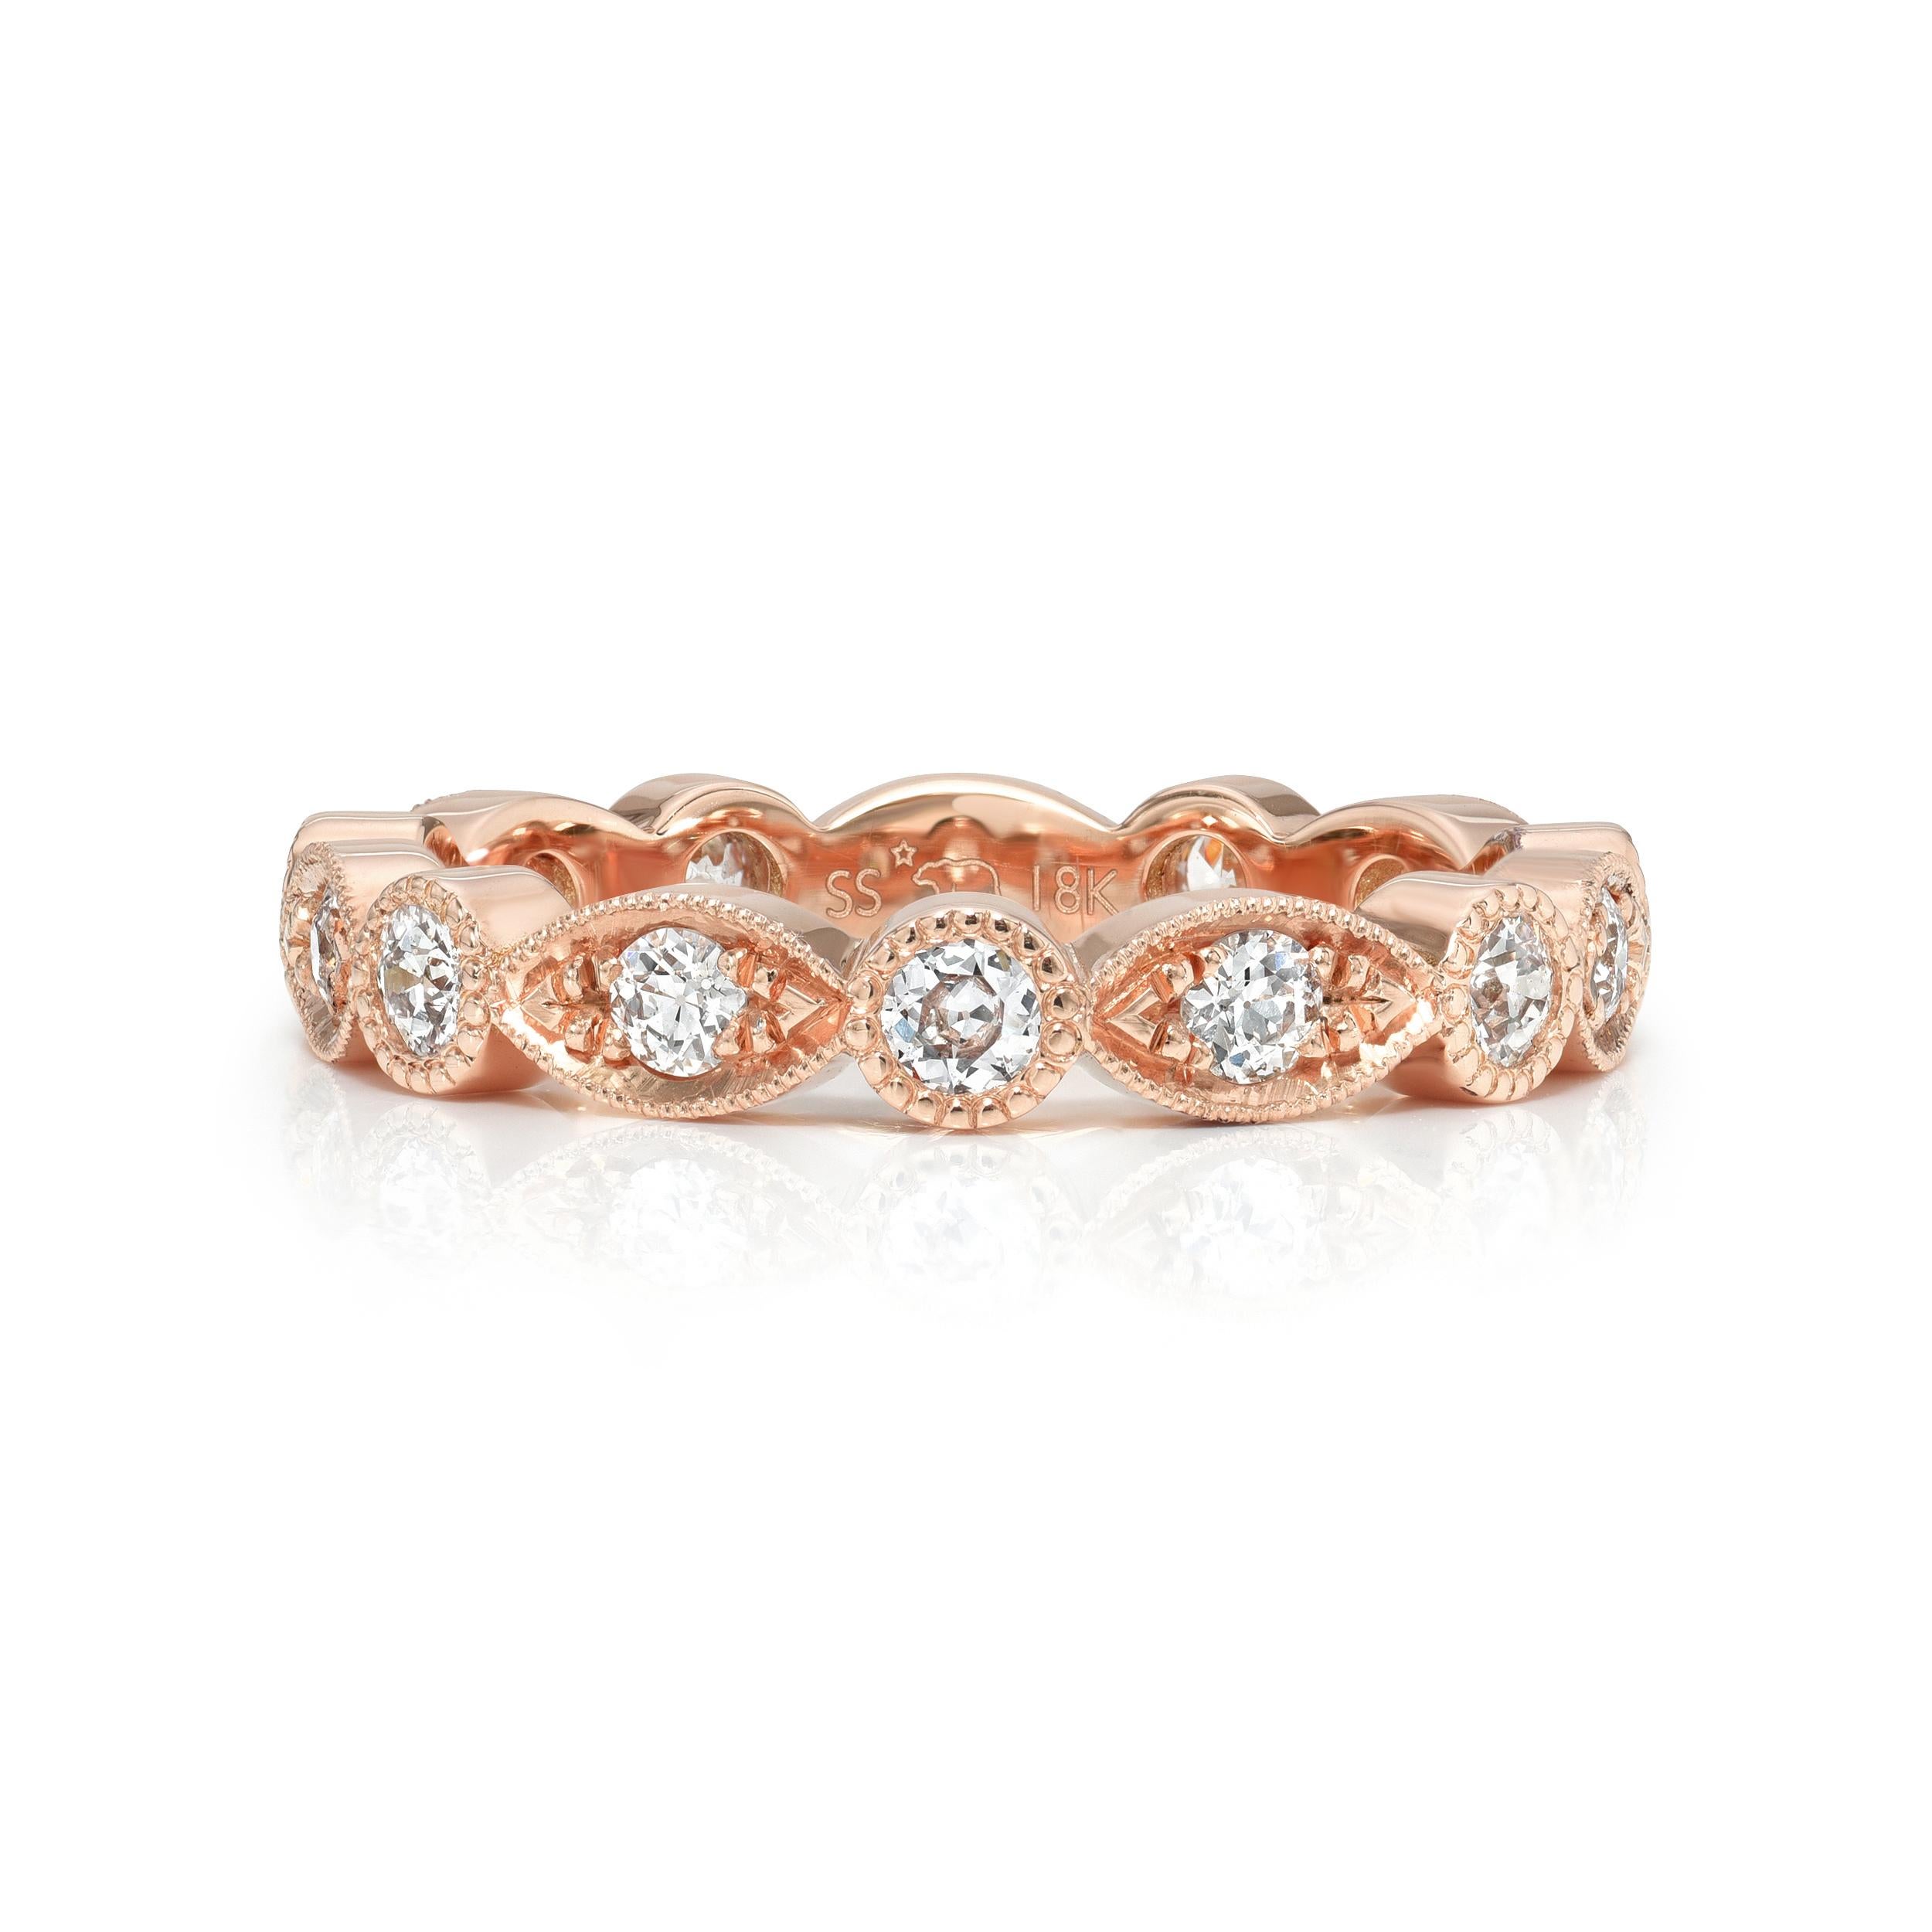 For Sale:  Handcrafted Elizabeth Old European Cut Diamond Eternity Band by Single Stone 2